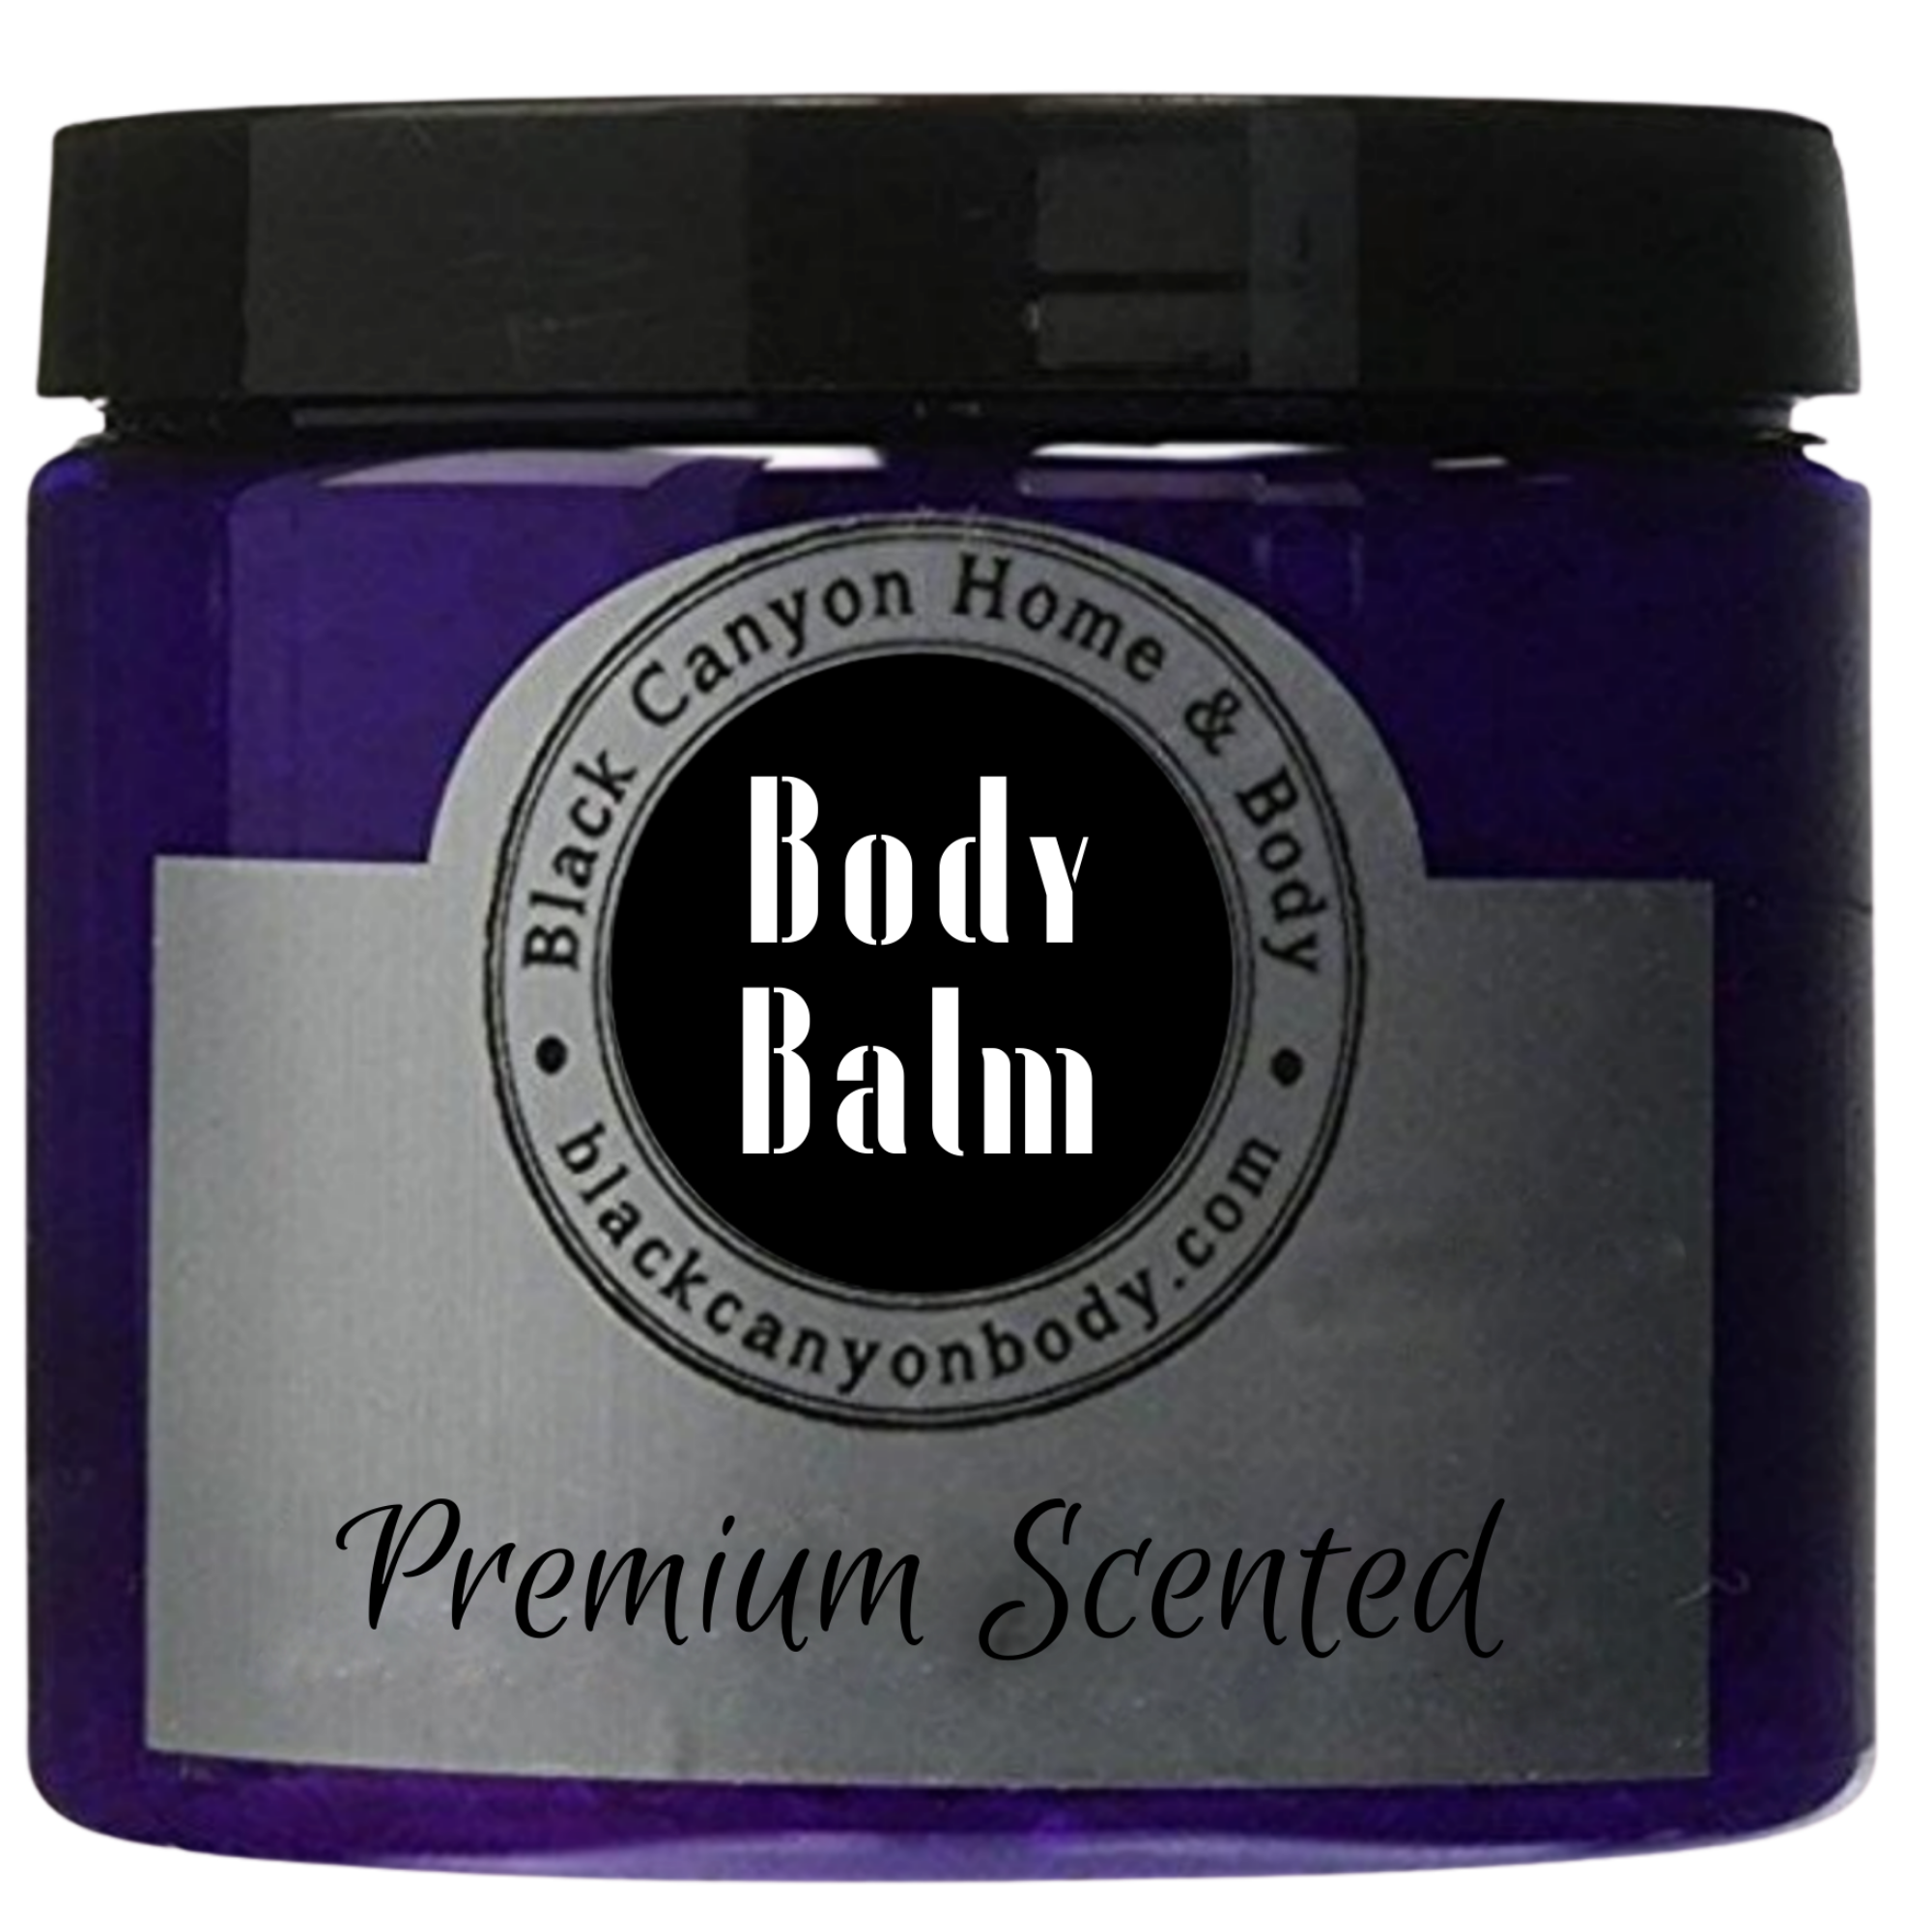 Paydens Cobalt Bay Rum Scented Natural Body Balm with Shea For Men